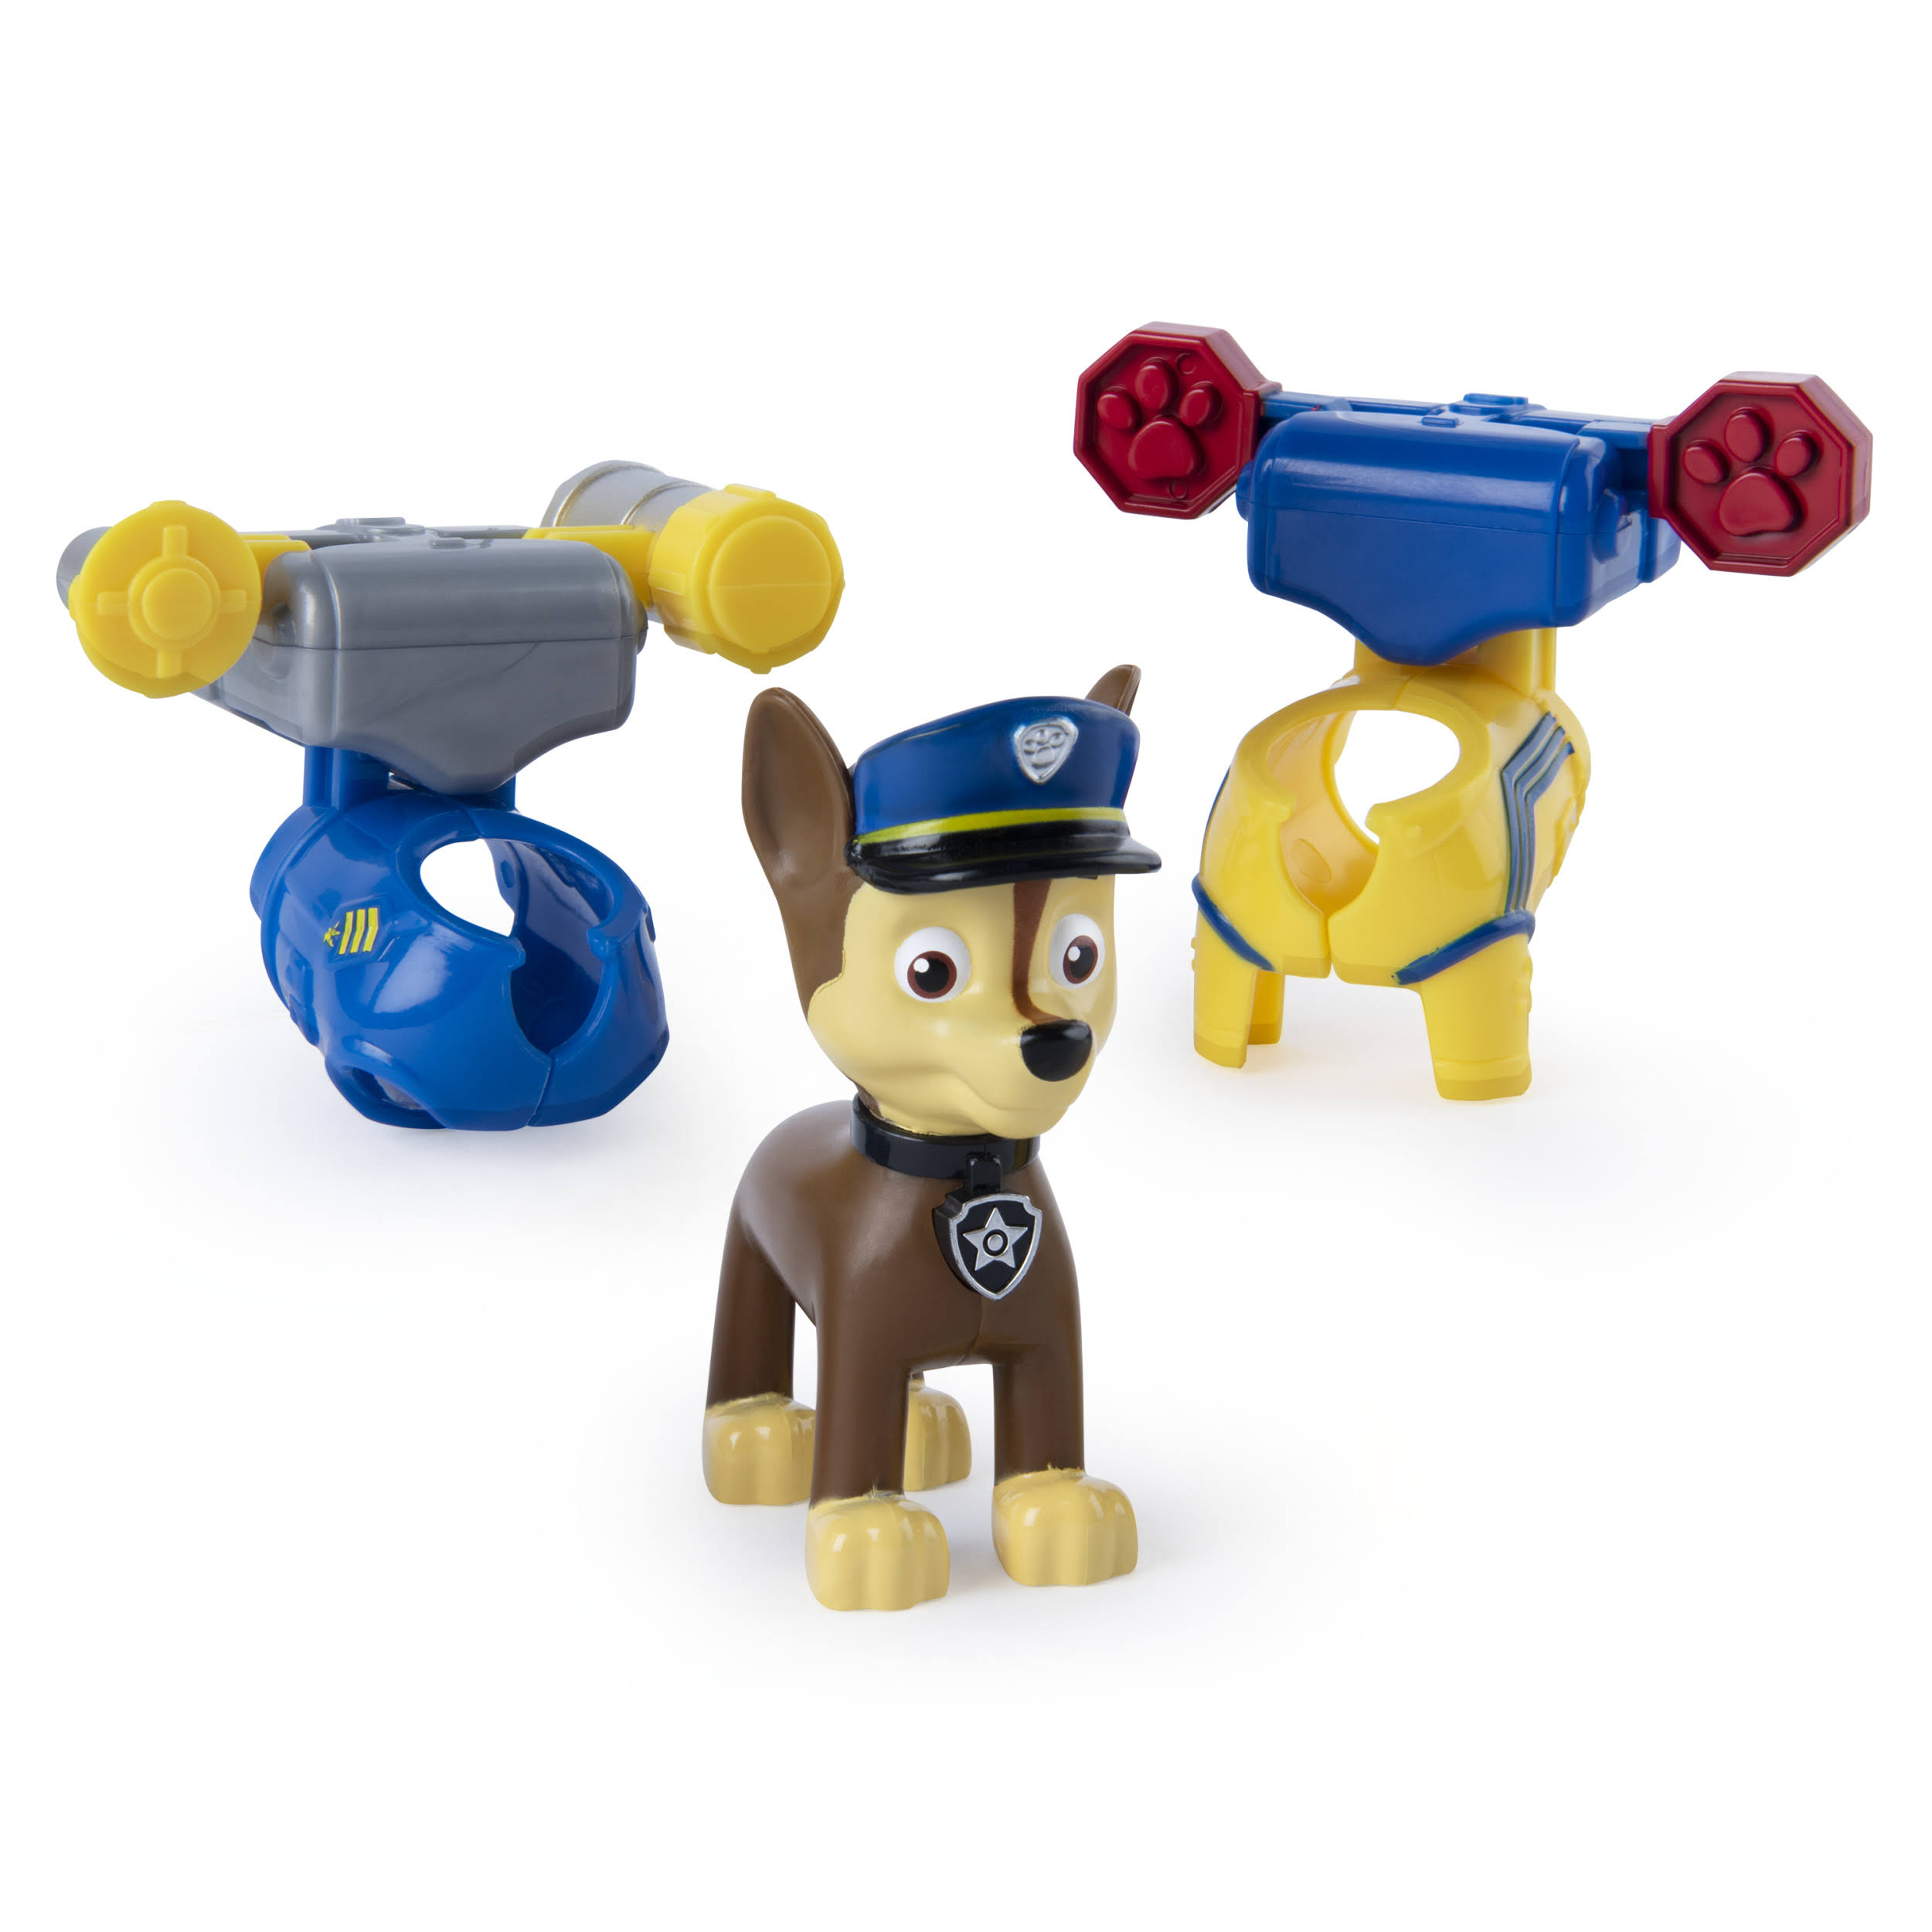 Paw Patrol Figures with Action Pack and Badge